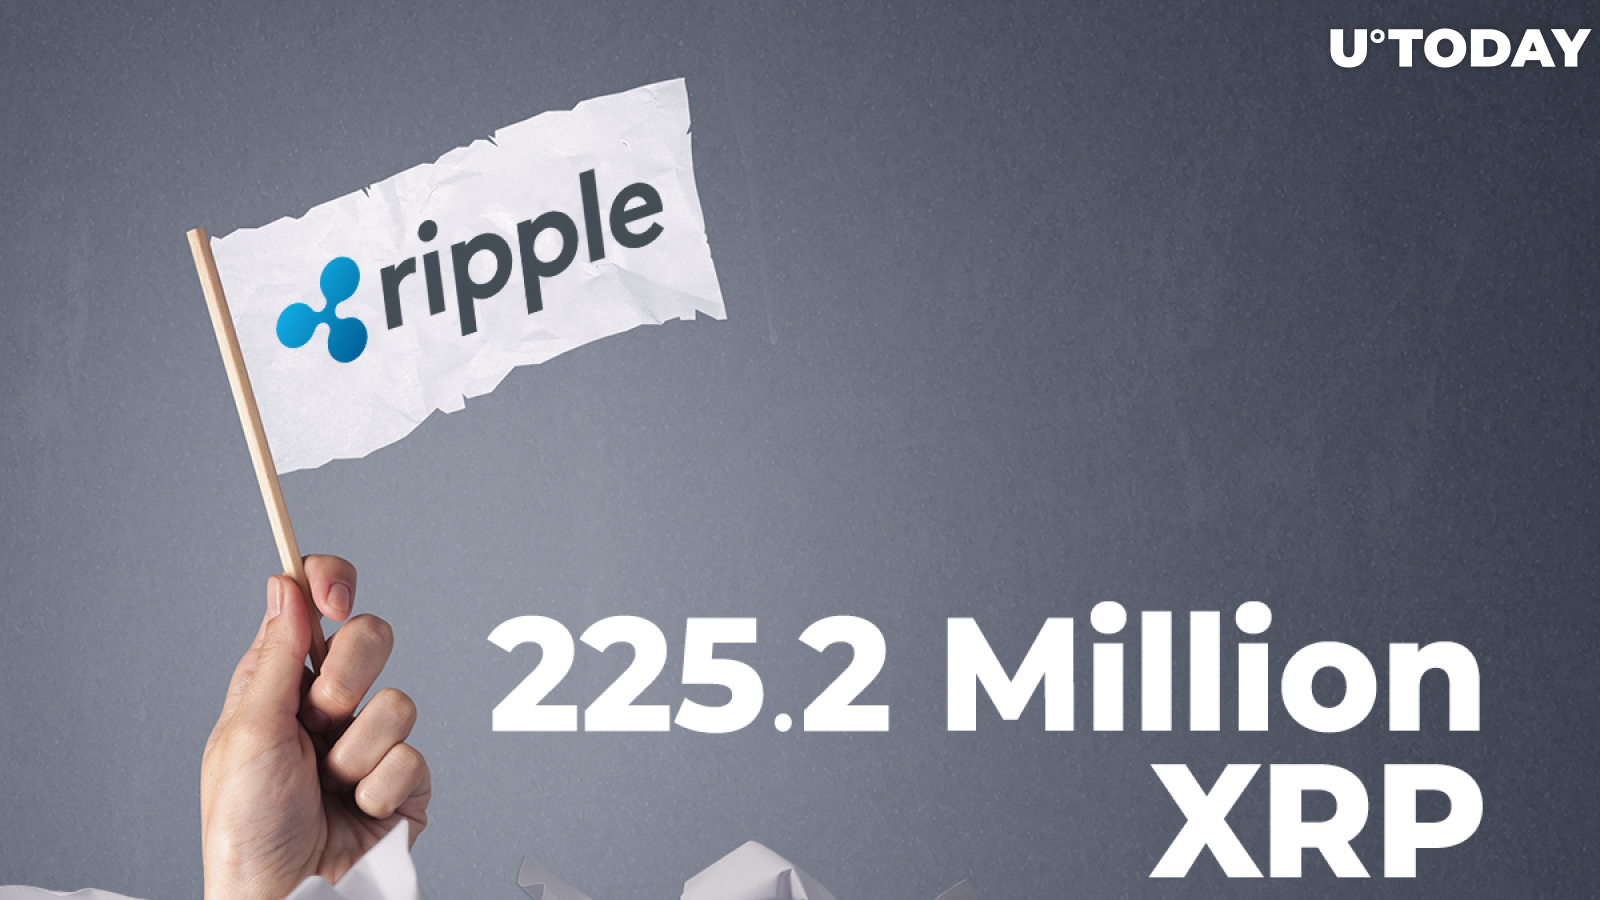 Ripple Giant Helps Wire Whopping 225.2 Million XRP Over Past 24 Hours